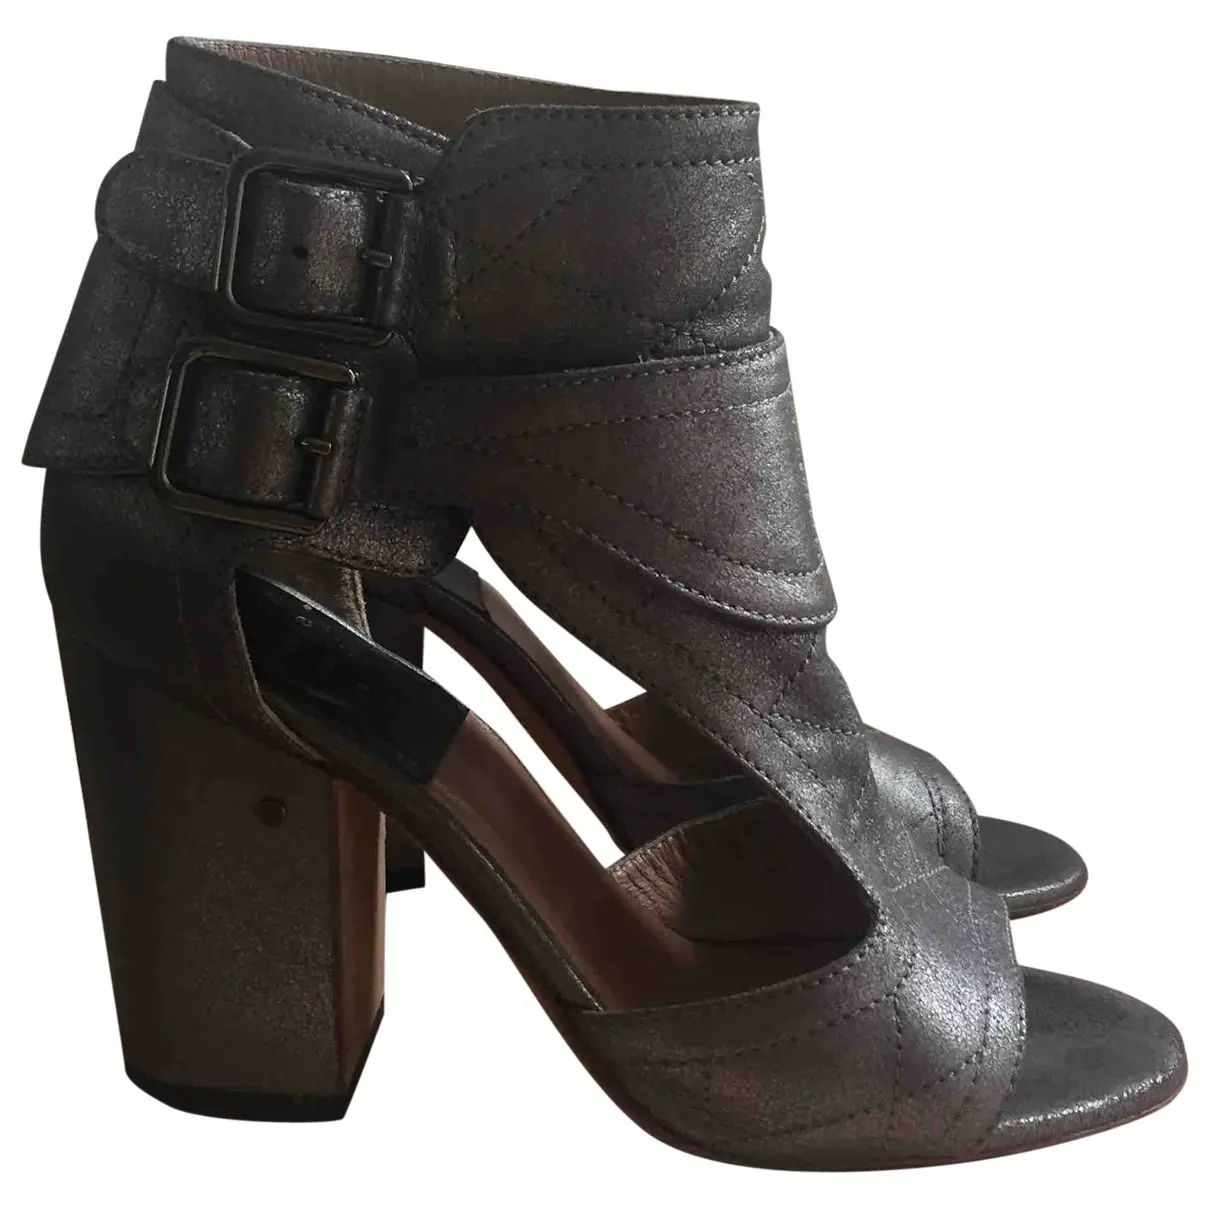 Leather sandals Laurence Dacade